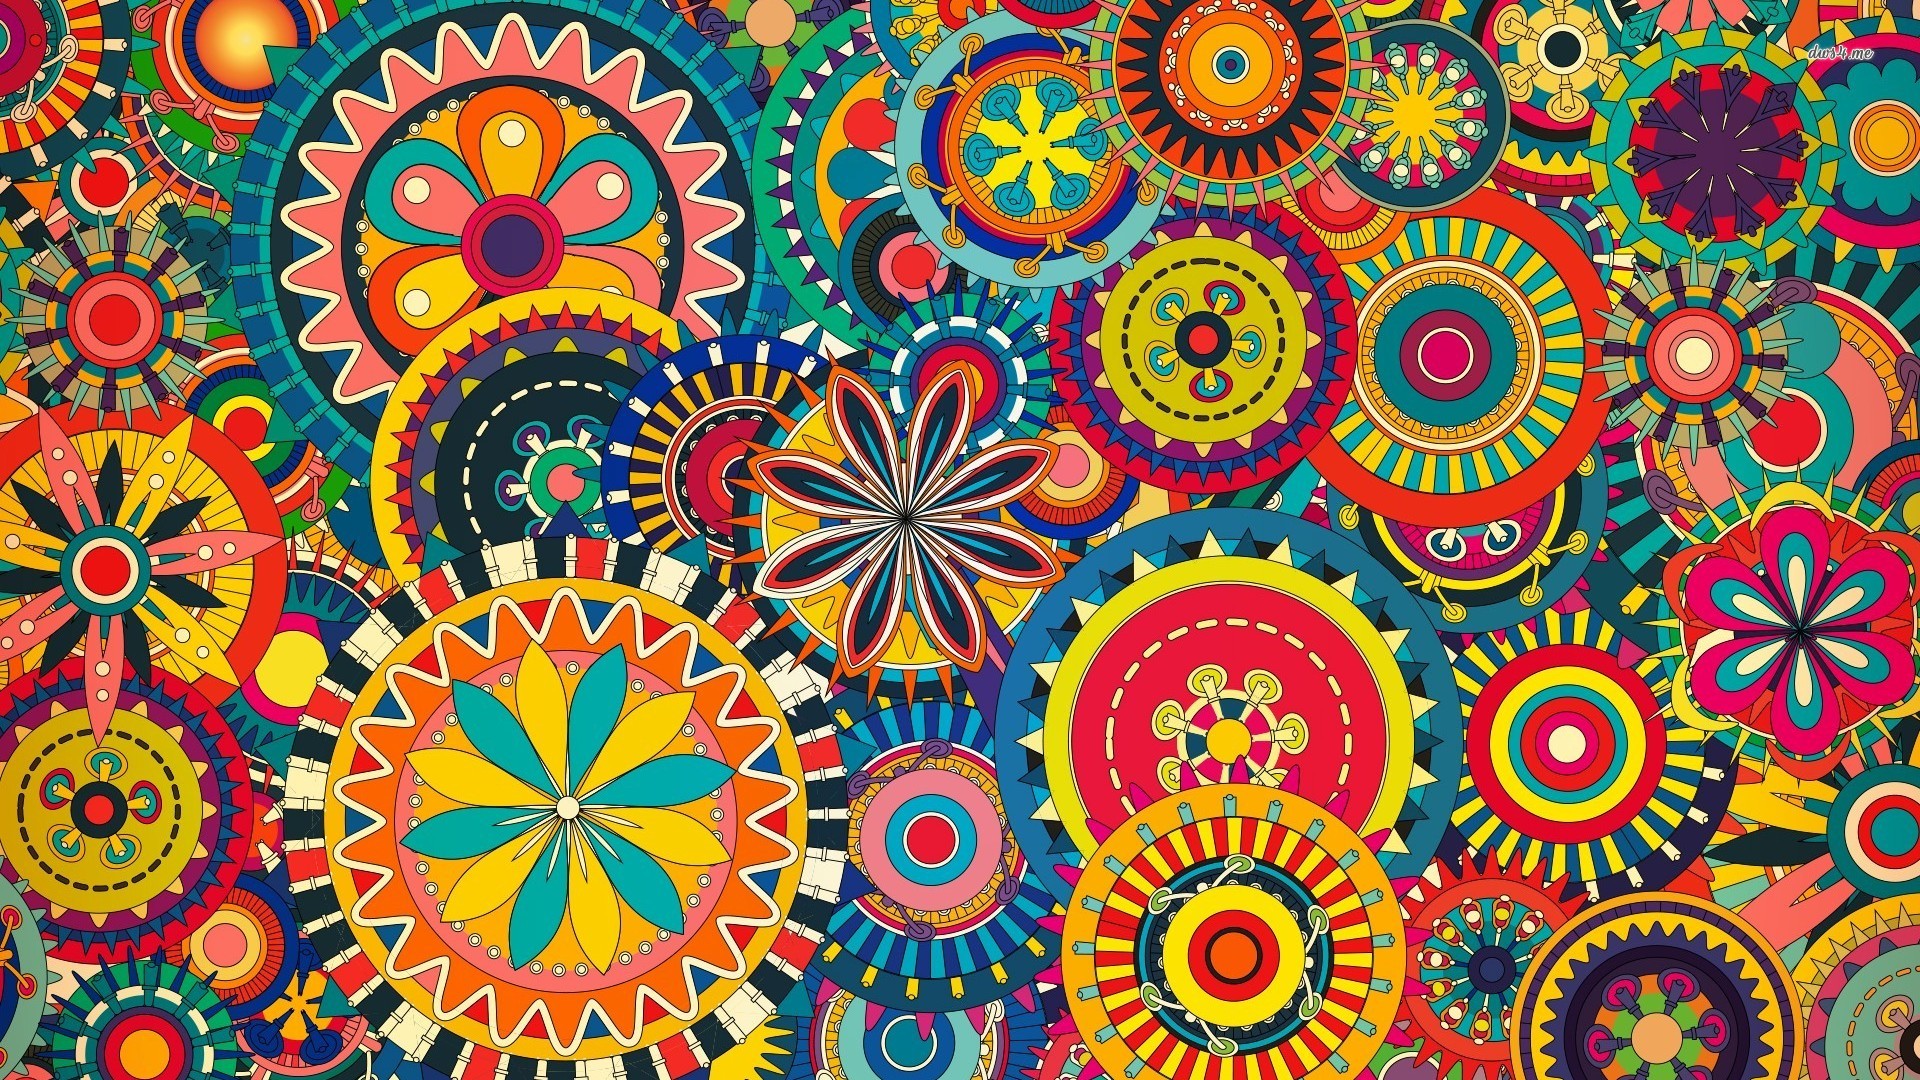 Colorful Pattern Backgrounds wallpaper 1920x1080 32690